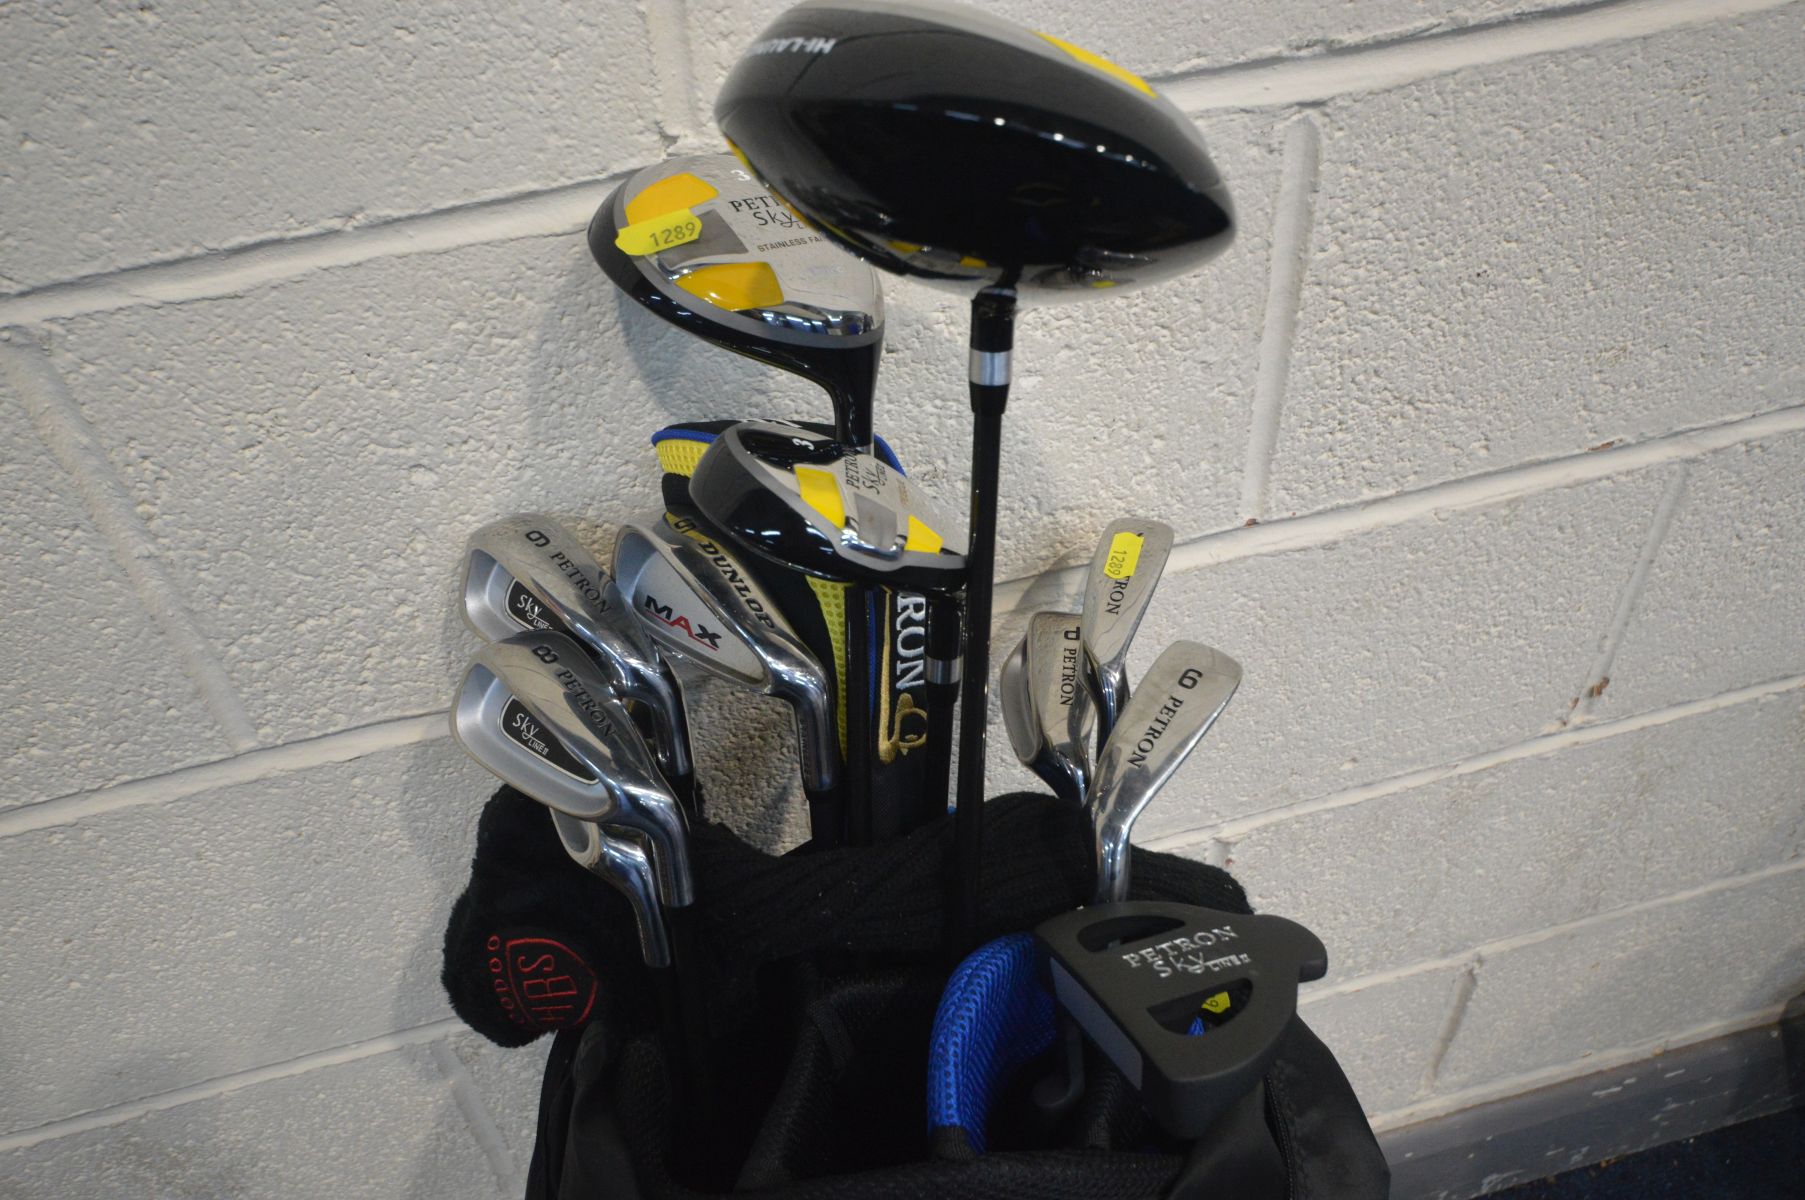 A PETRON GOLF BAG CONTAINING PETRON GOLF CLUBS, and a Dunlop golf club along with a bag of balls and - Image 2 of 4